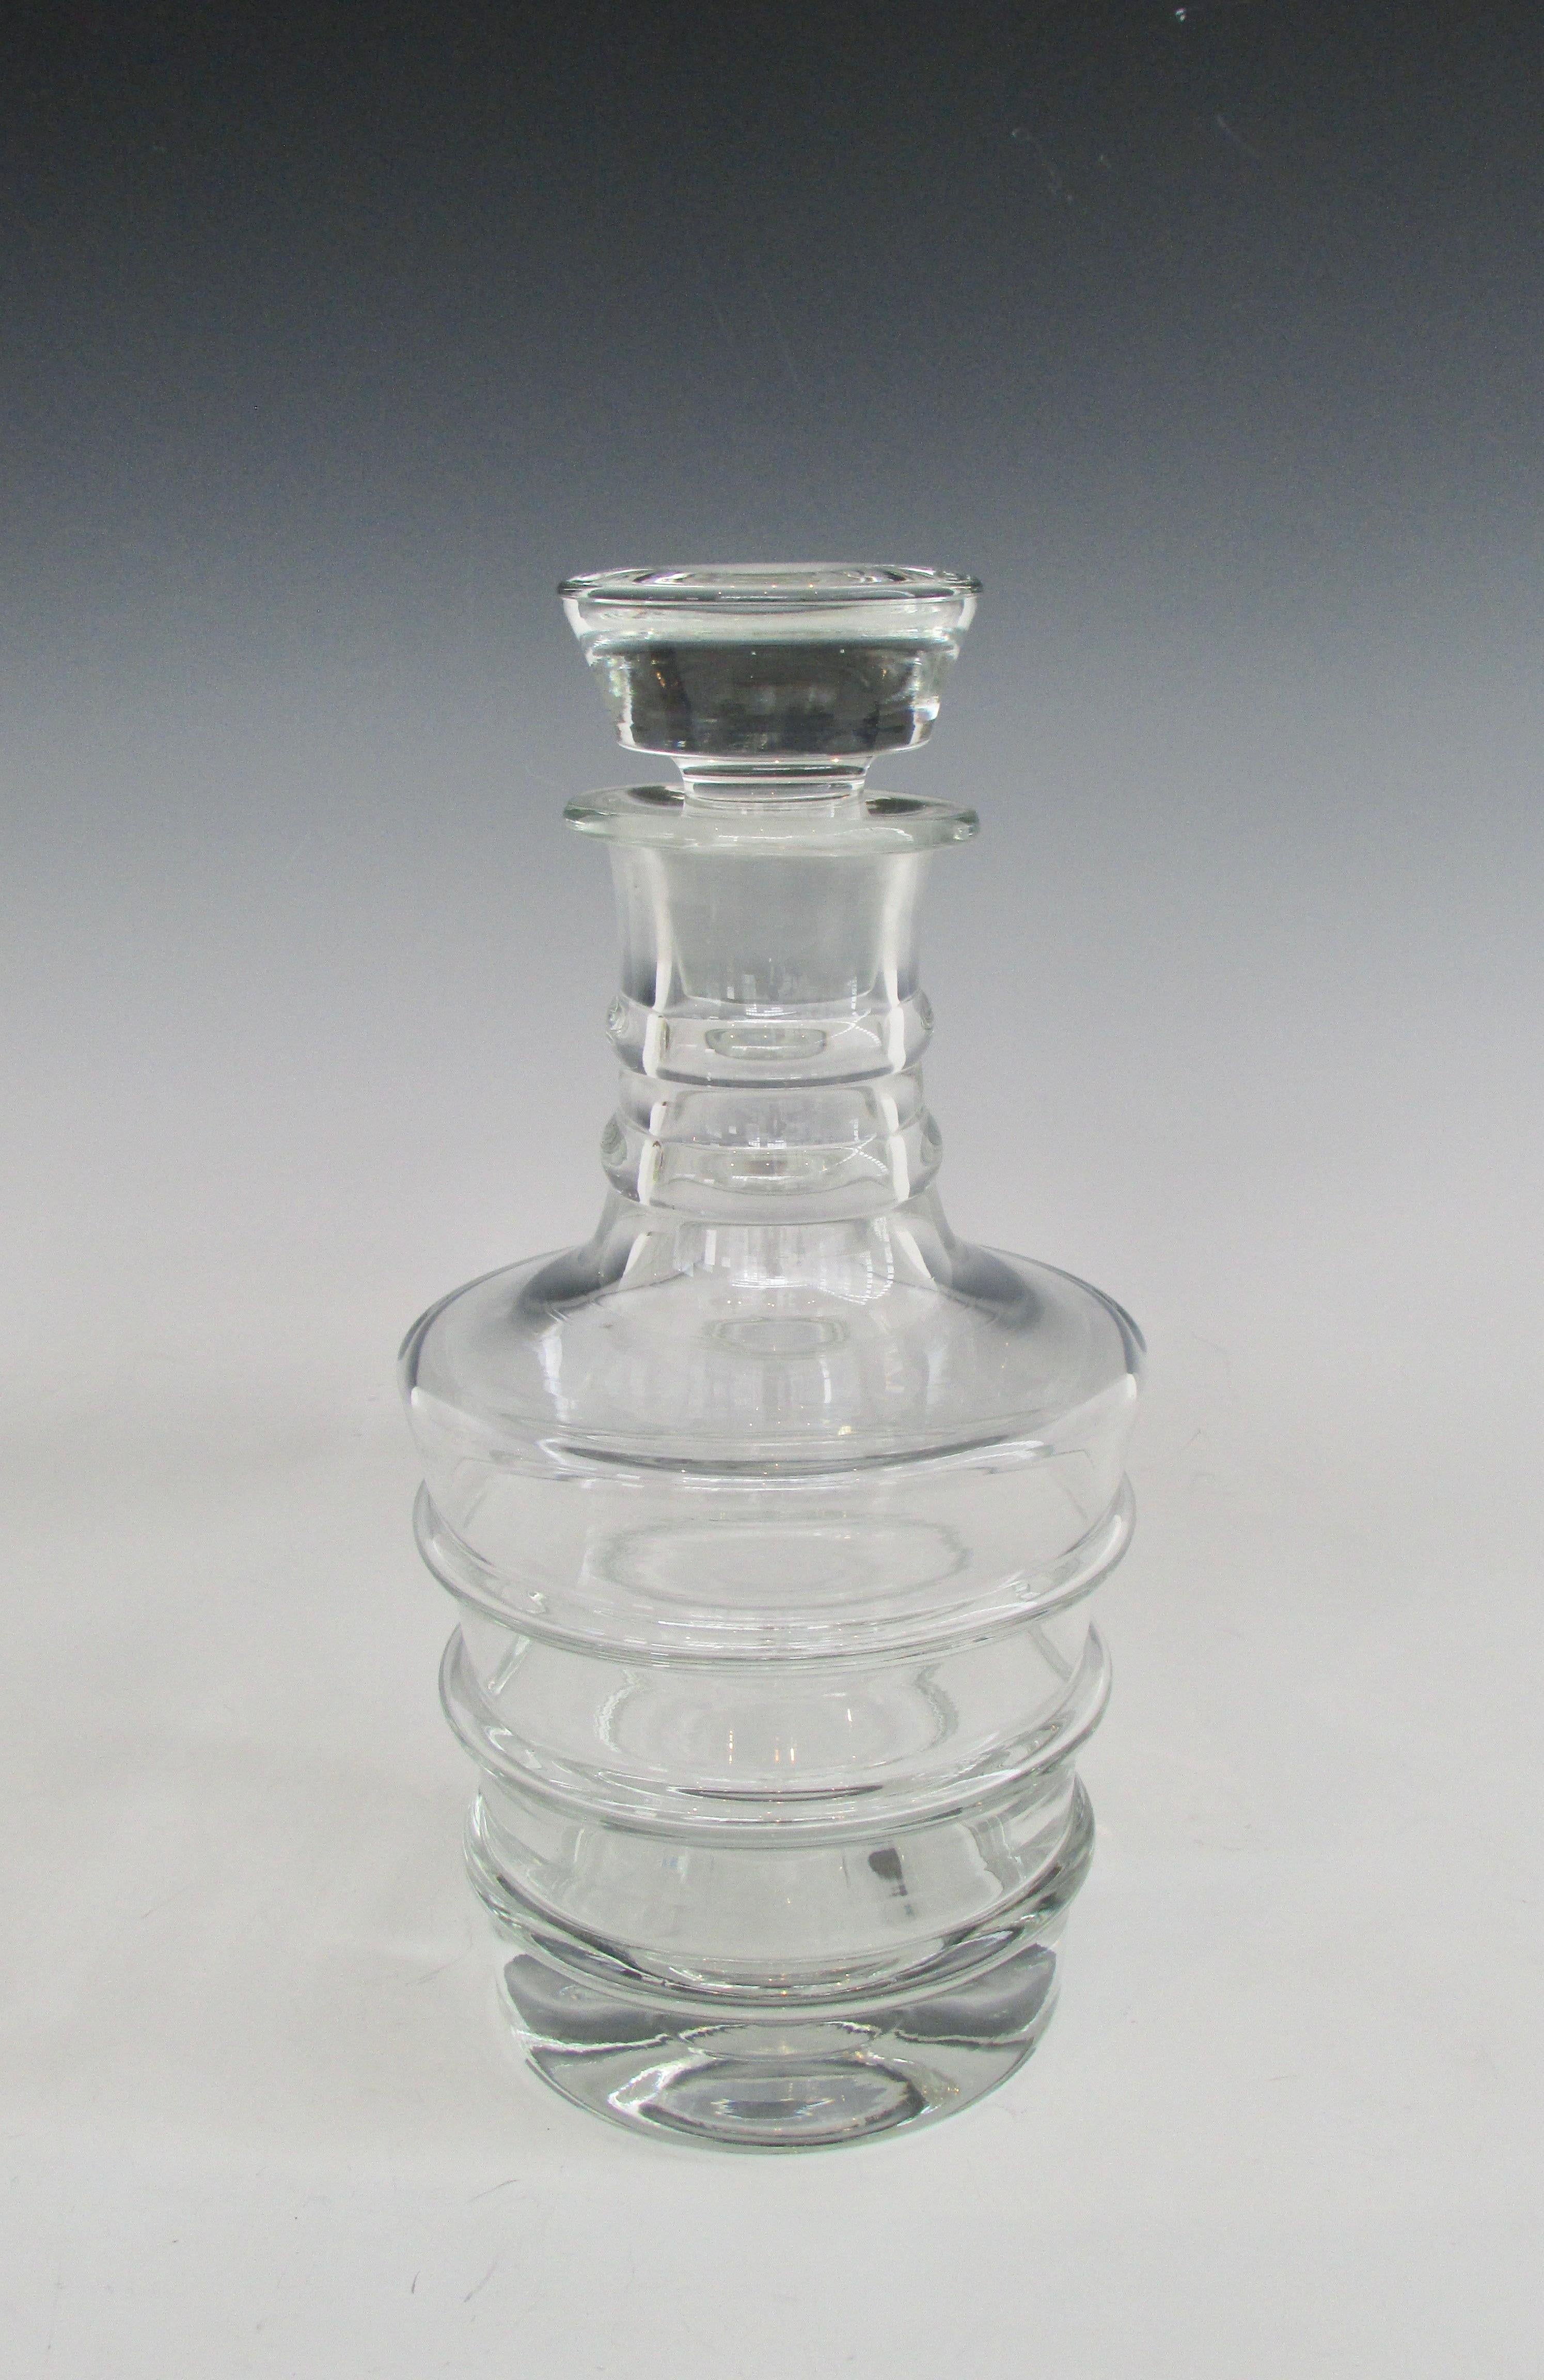 Large substantial clear glass decanter with stopper.